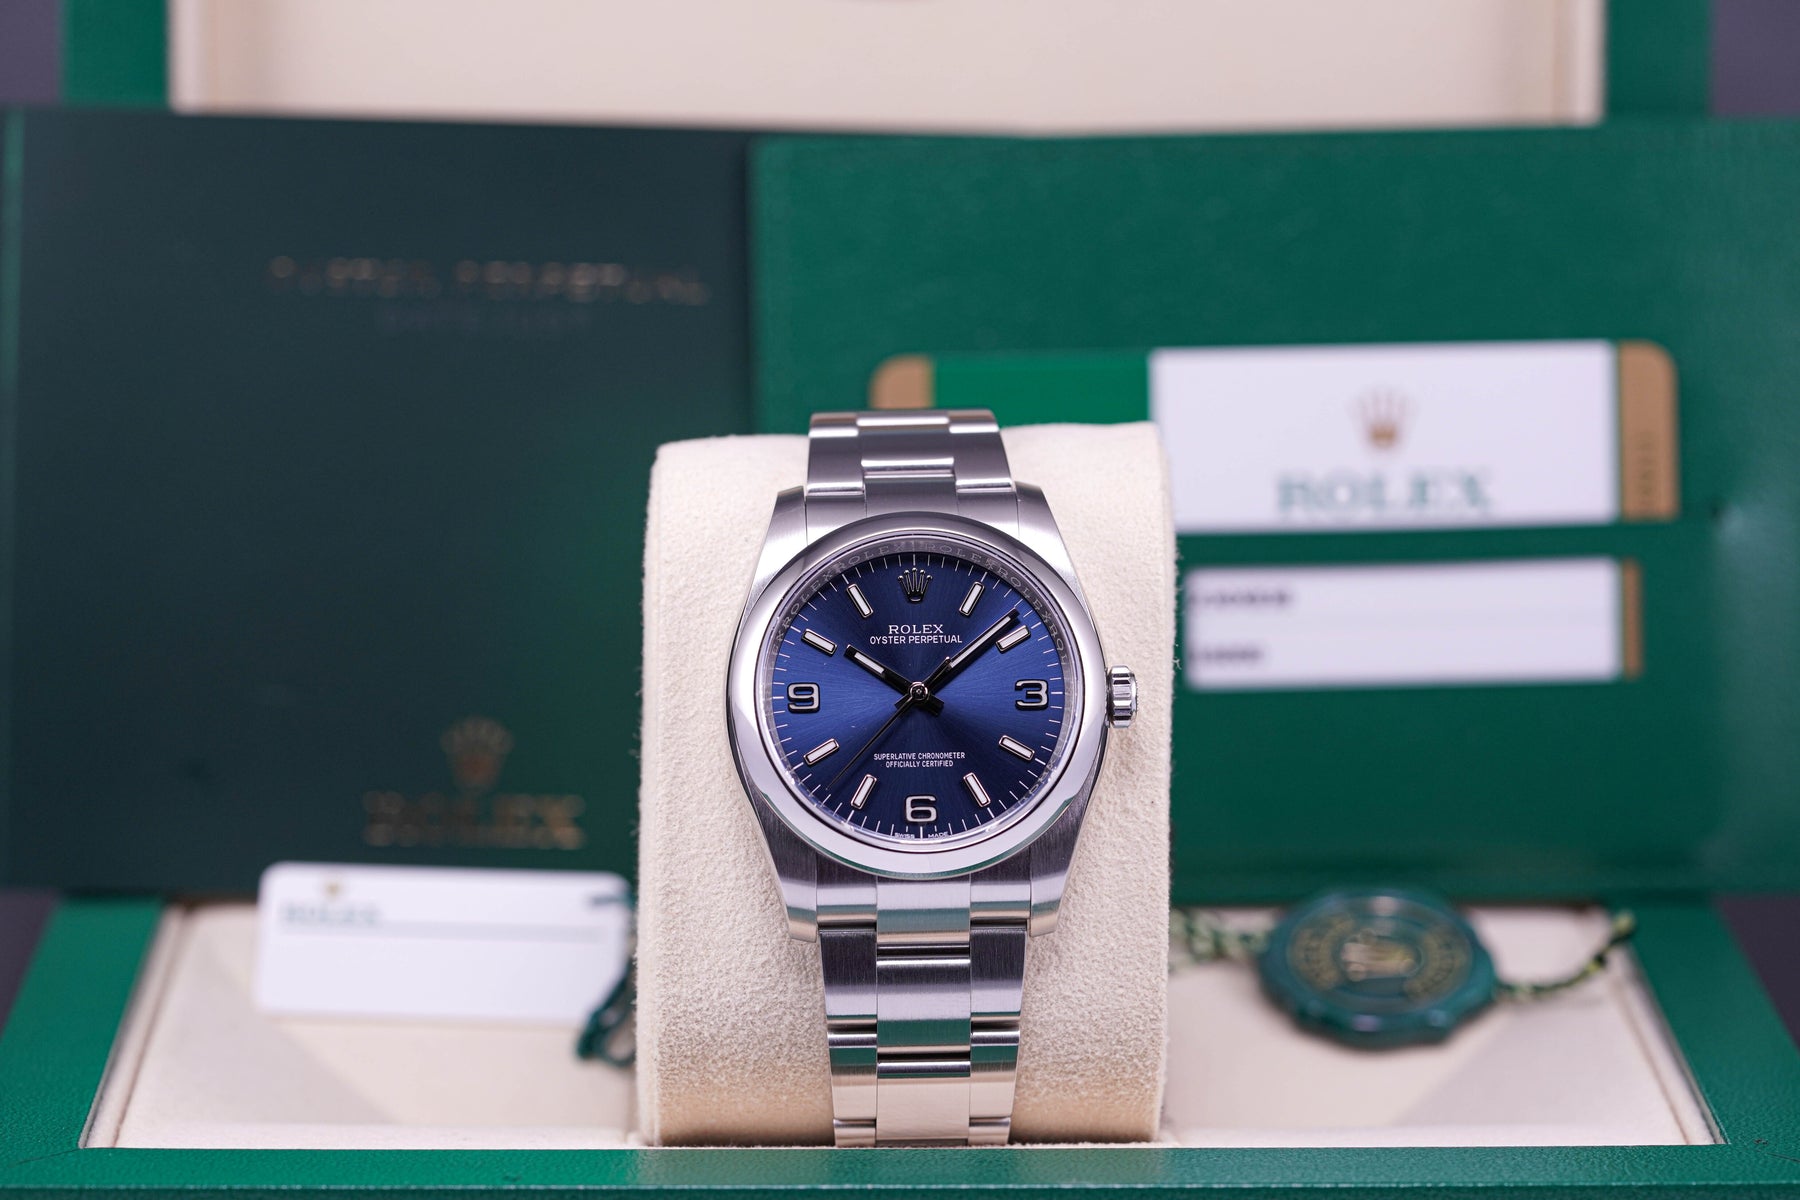 OYSTER PERPETUAL 36MM BLUE DIAL (2019)